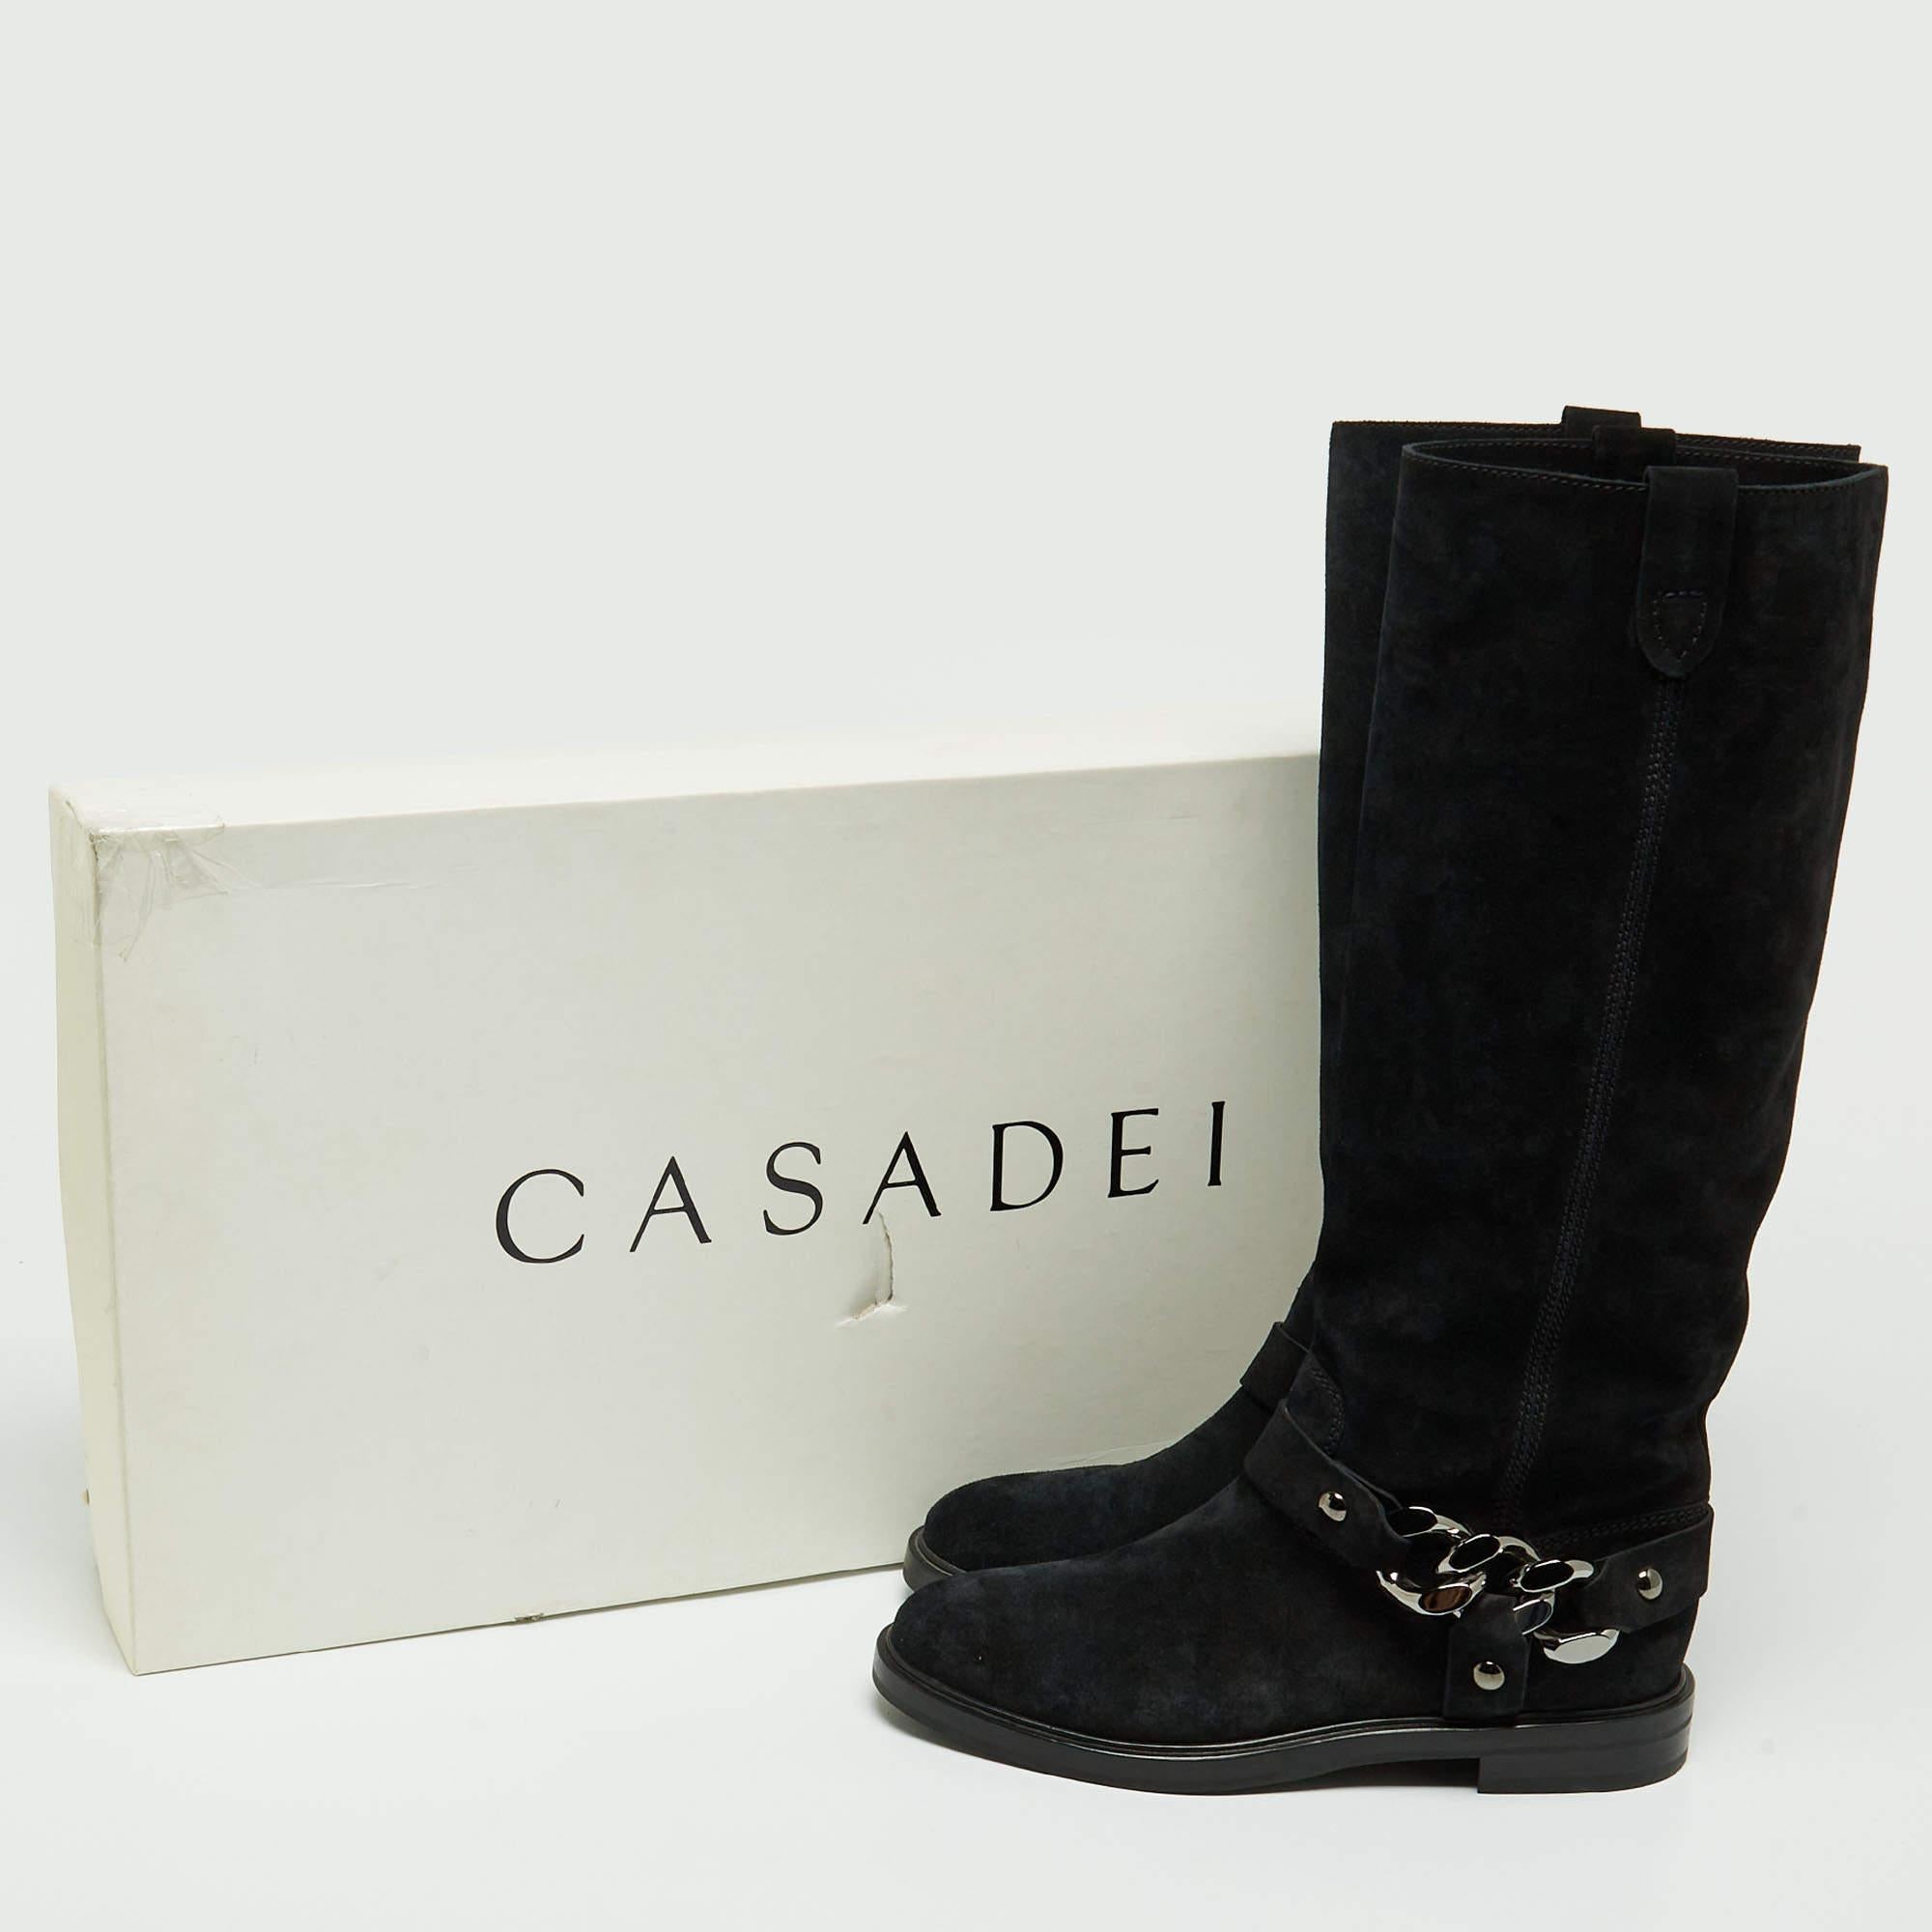 Casadei Black Suede Knee Length Boots Size 38.5 For Sale 7